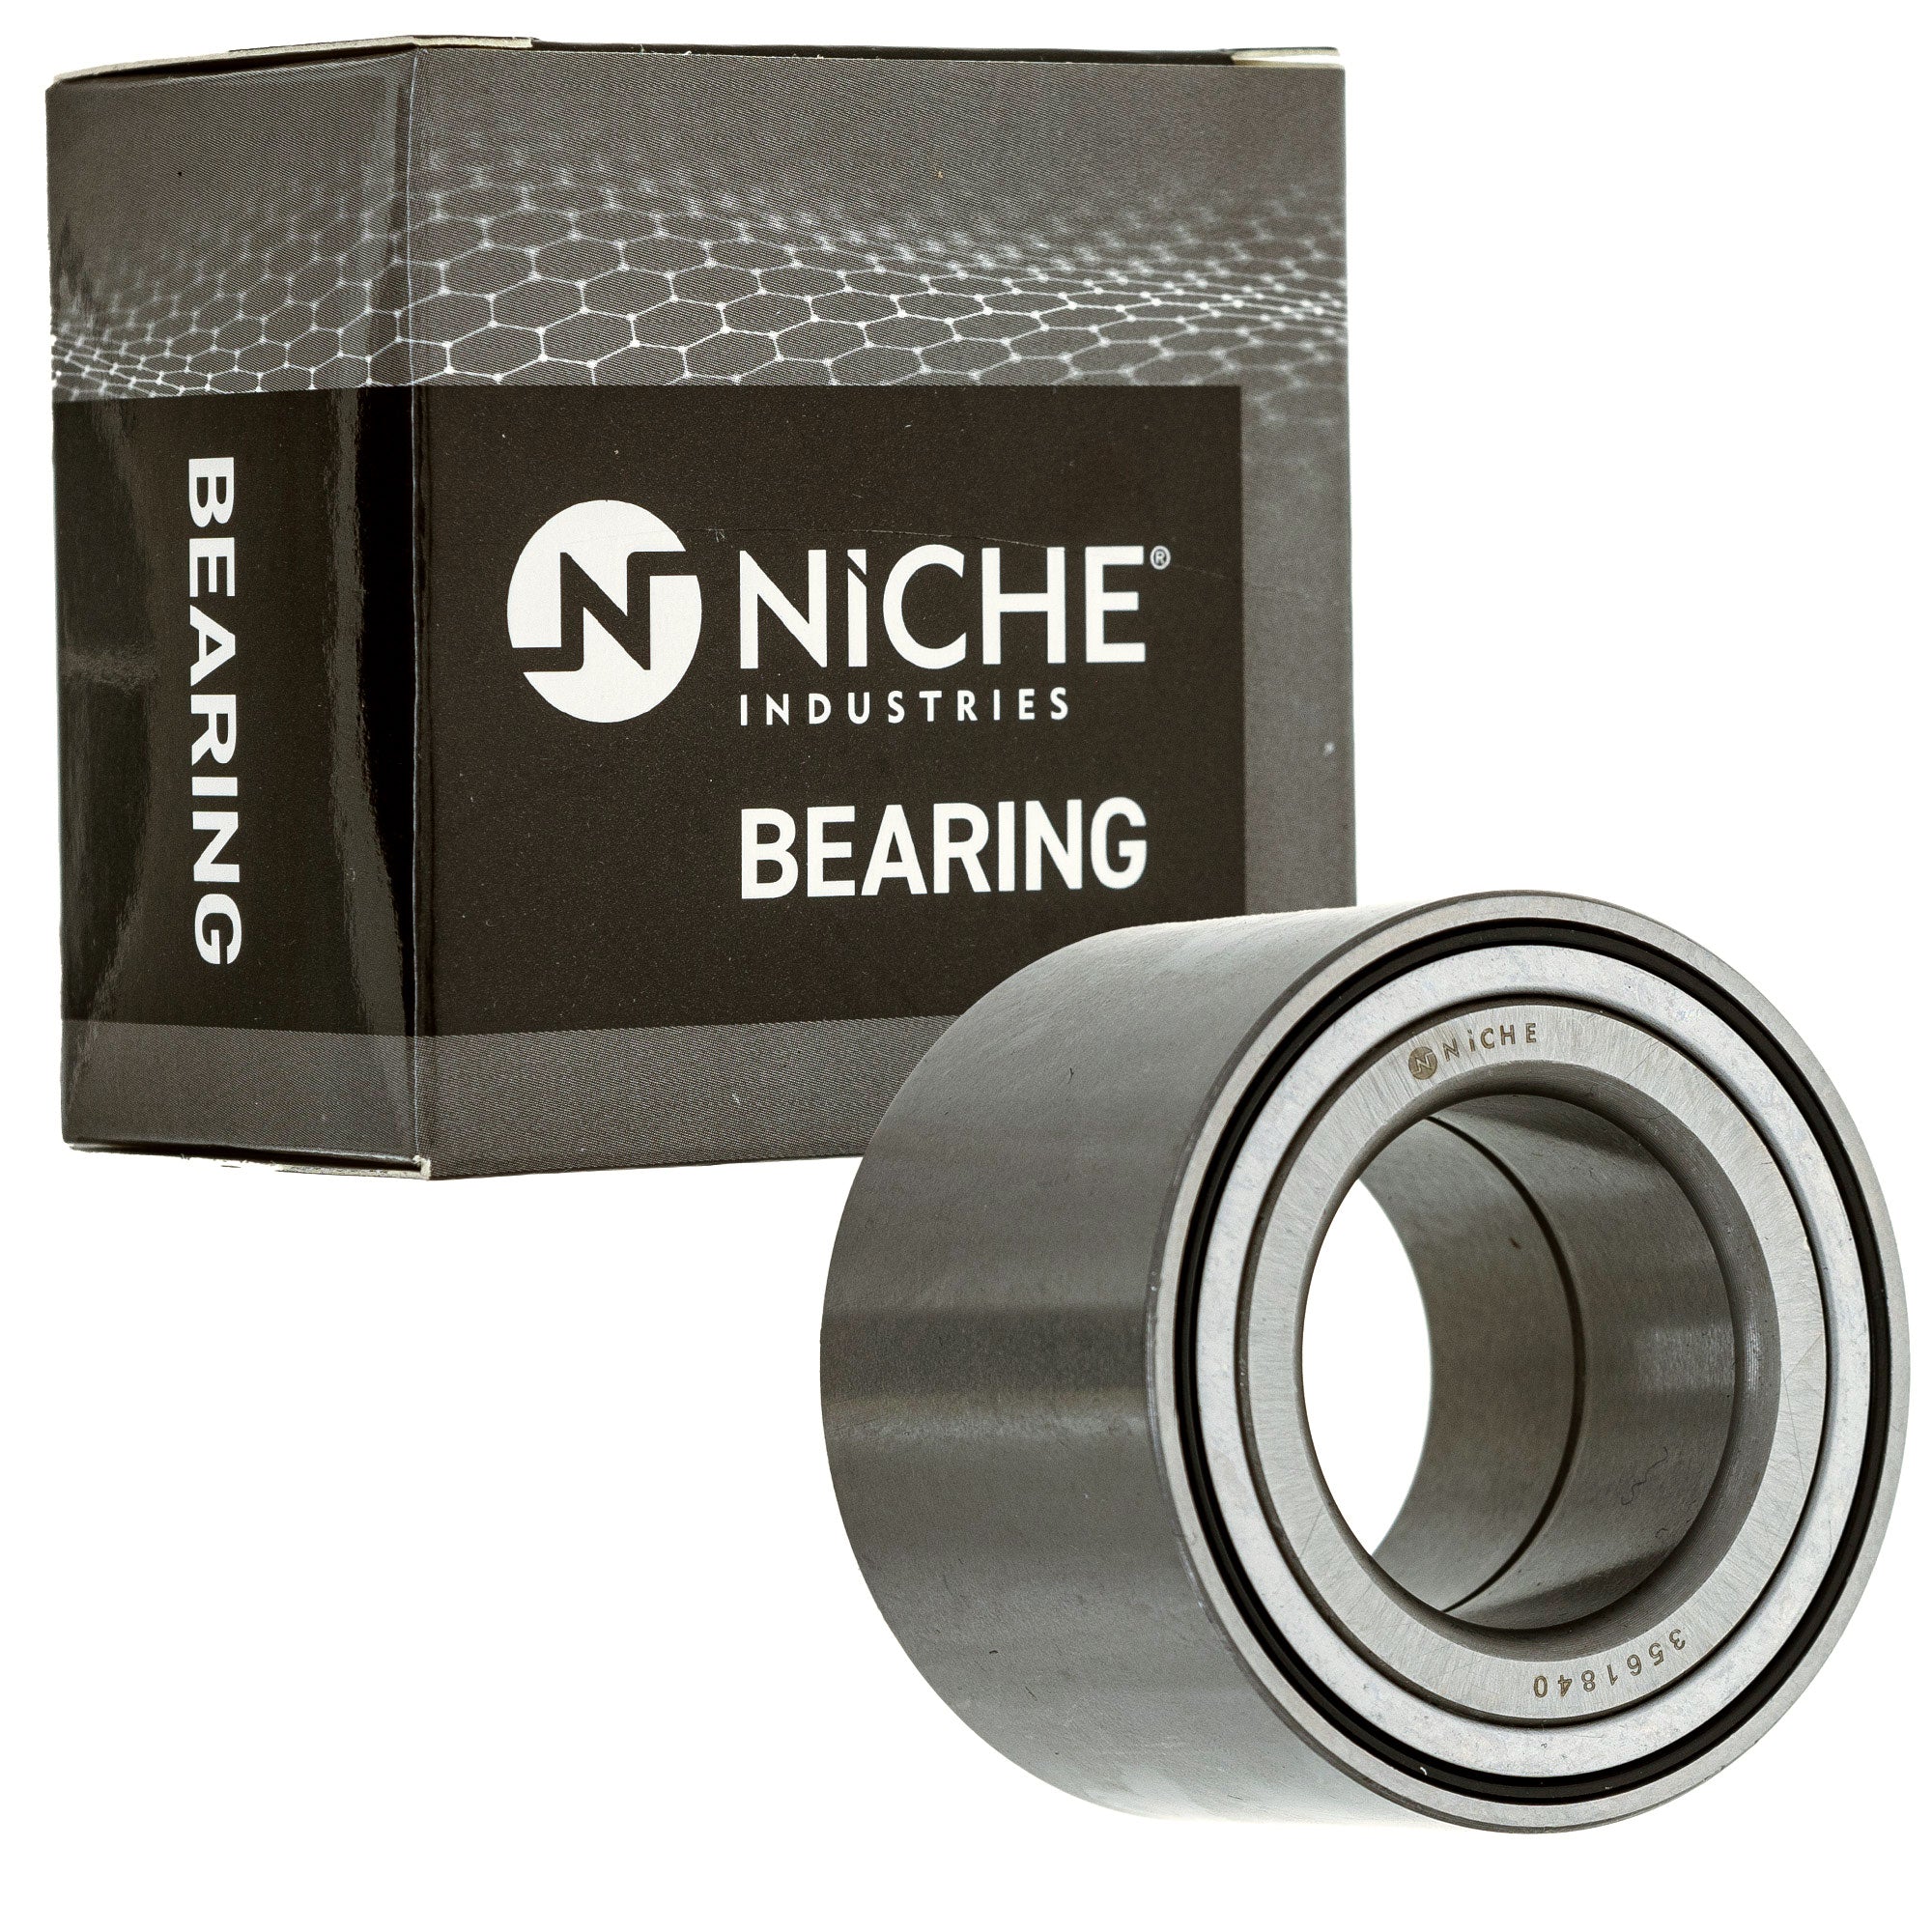 NICHE 519-CBB2216R Bearing for zOTHER King Concours